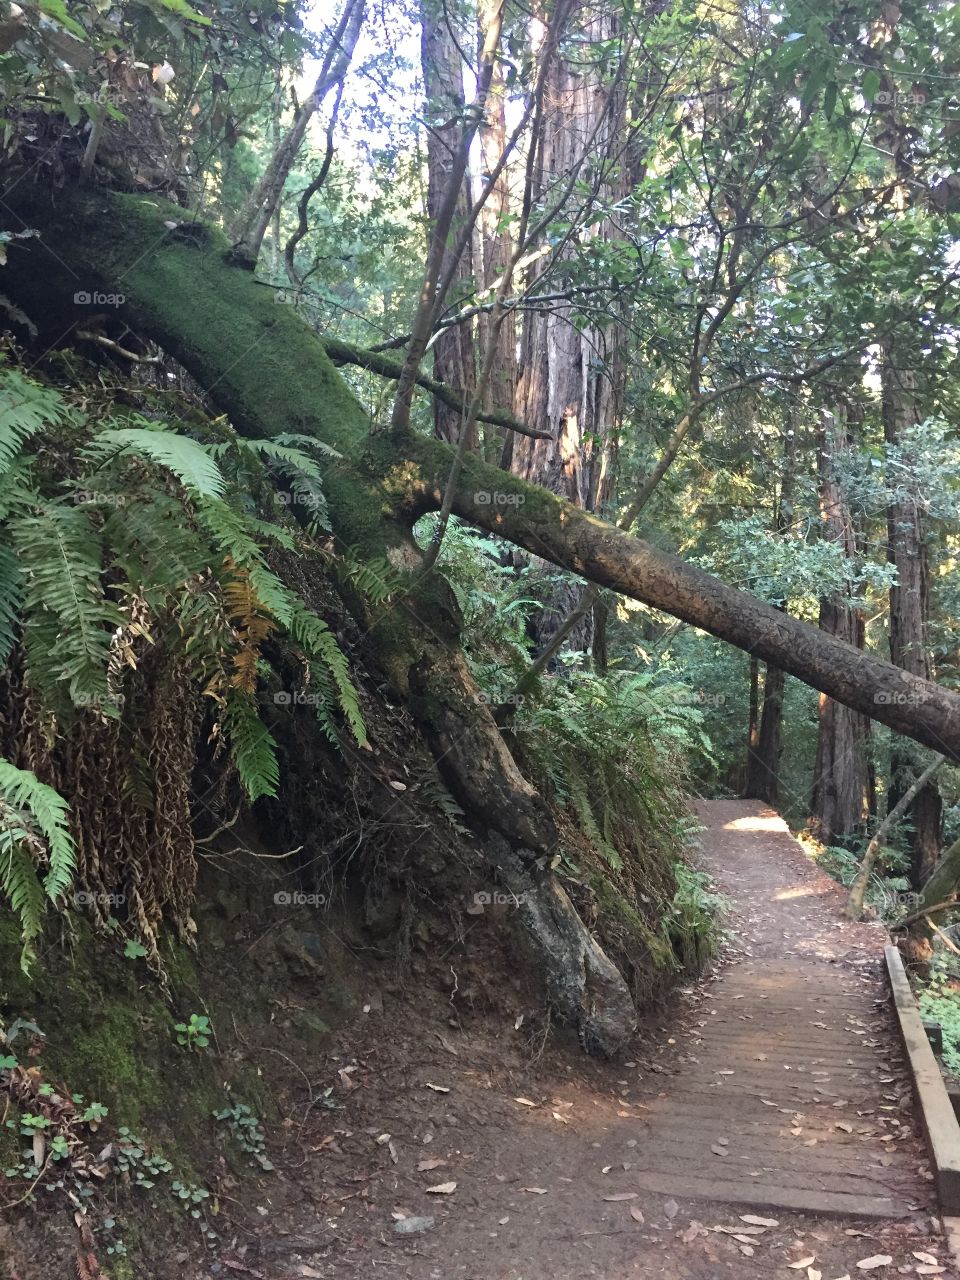 A mossy tree that crosses over a man made path through the forest of ferns and redwood trees 